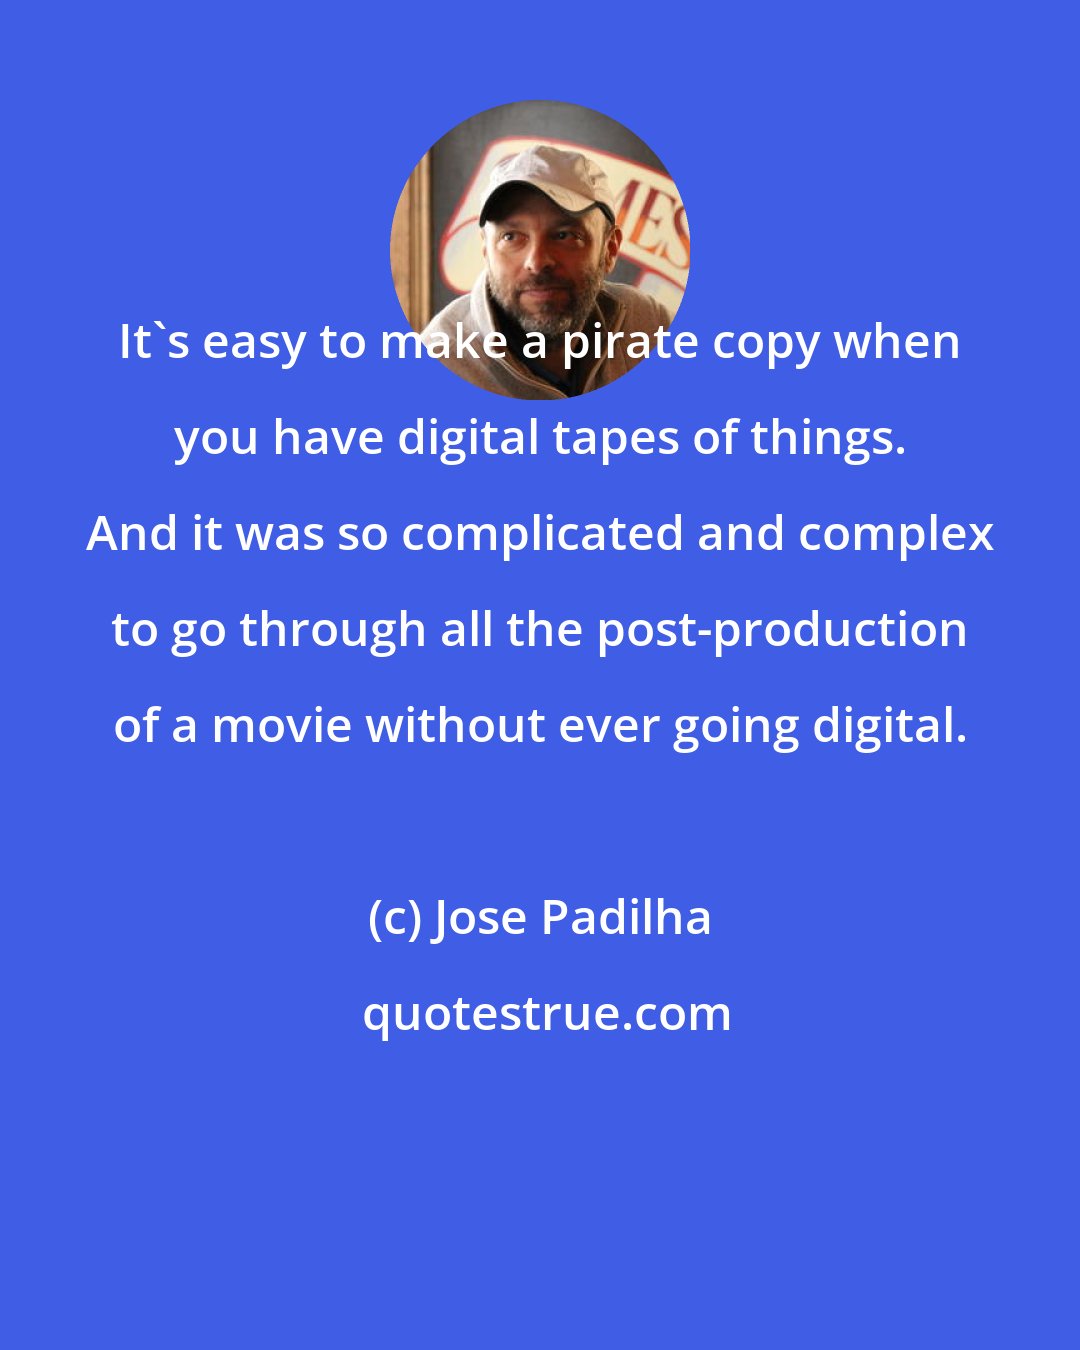 Jose Padilha: It's easy to make a pirate copy when you have digital tapes of things. And it was so complicated and complex to go through all the post-production of a movie without ever going digital.